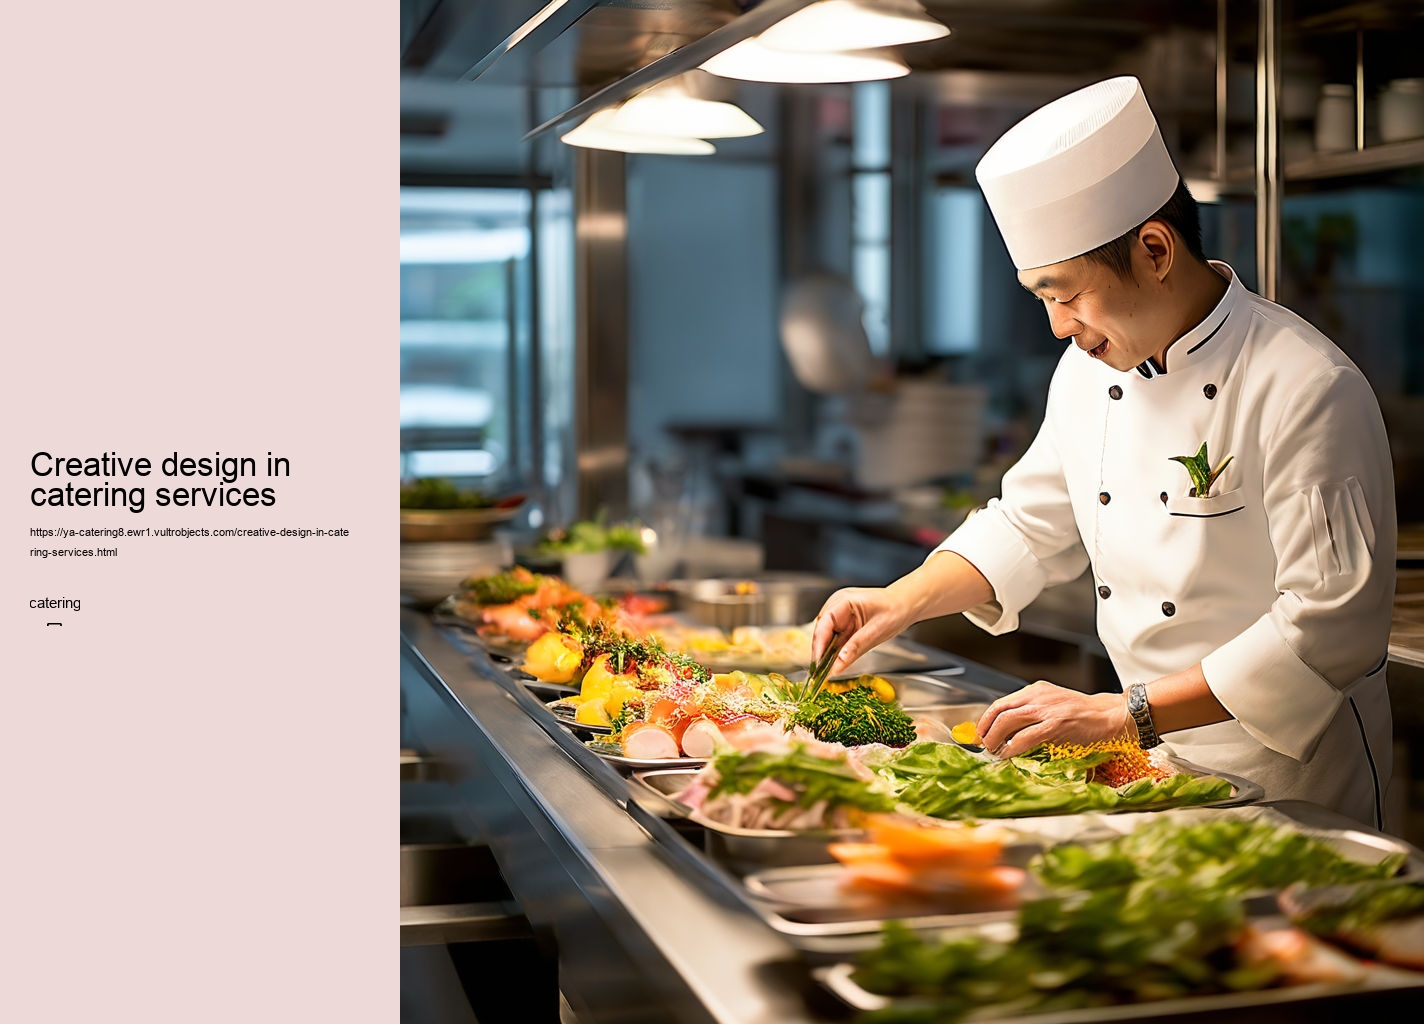 Creative design in catering services